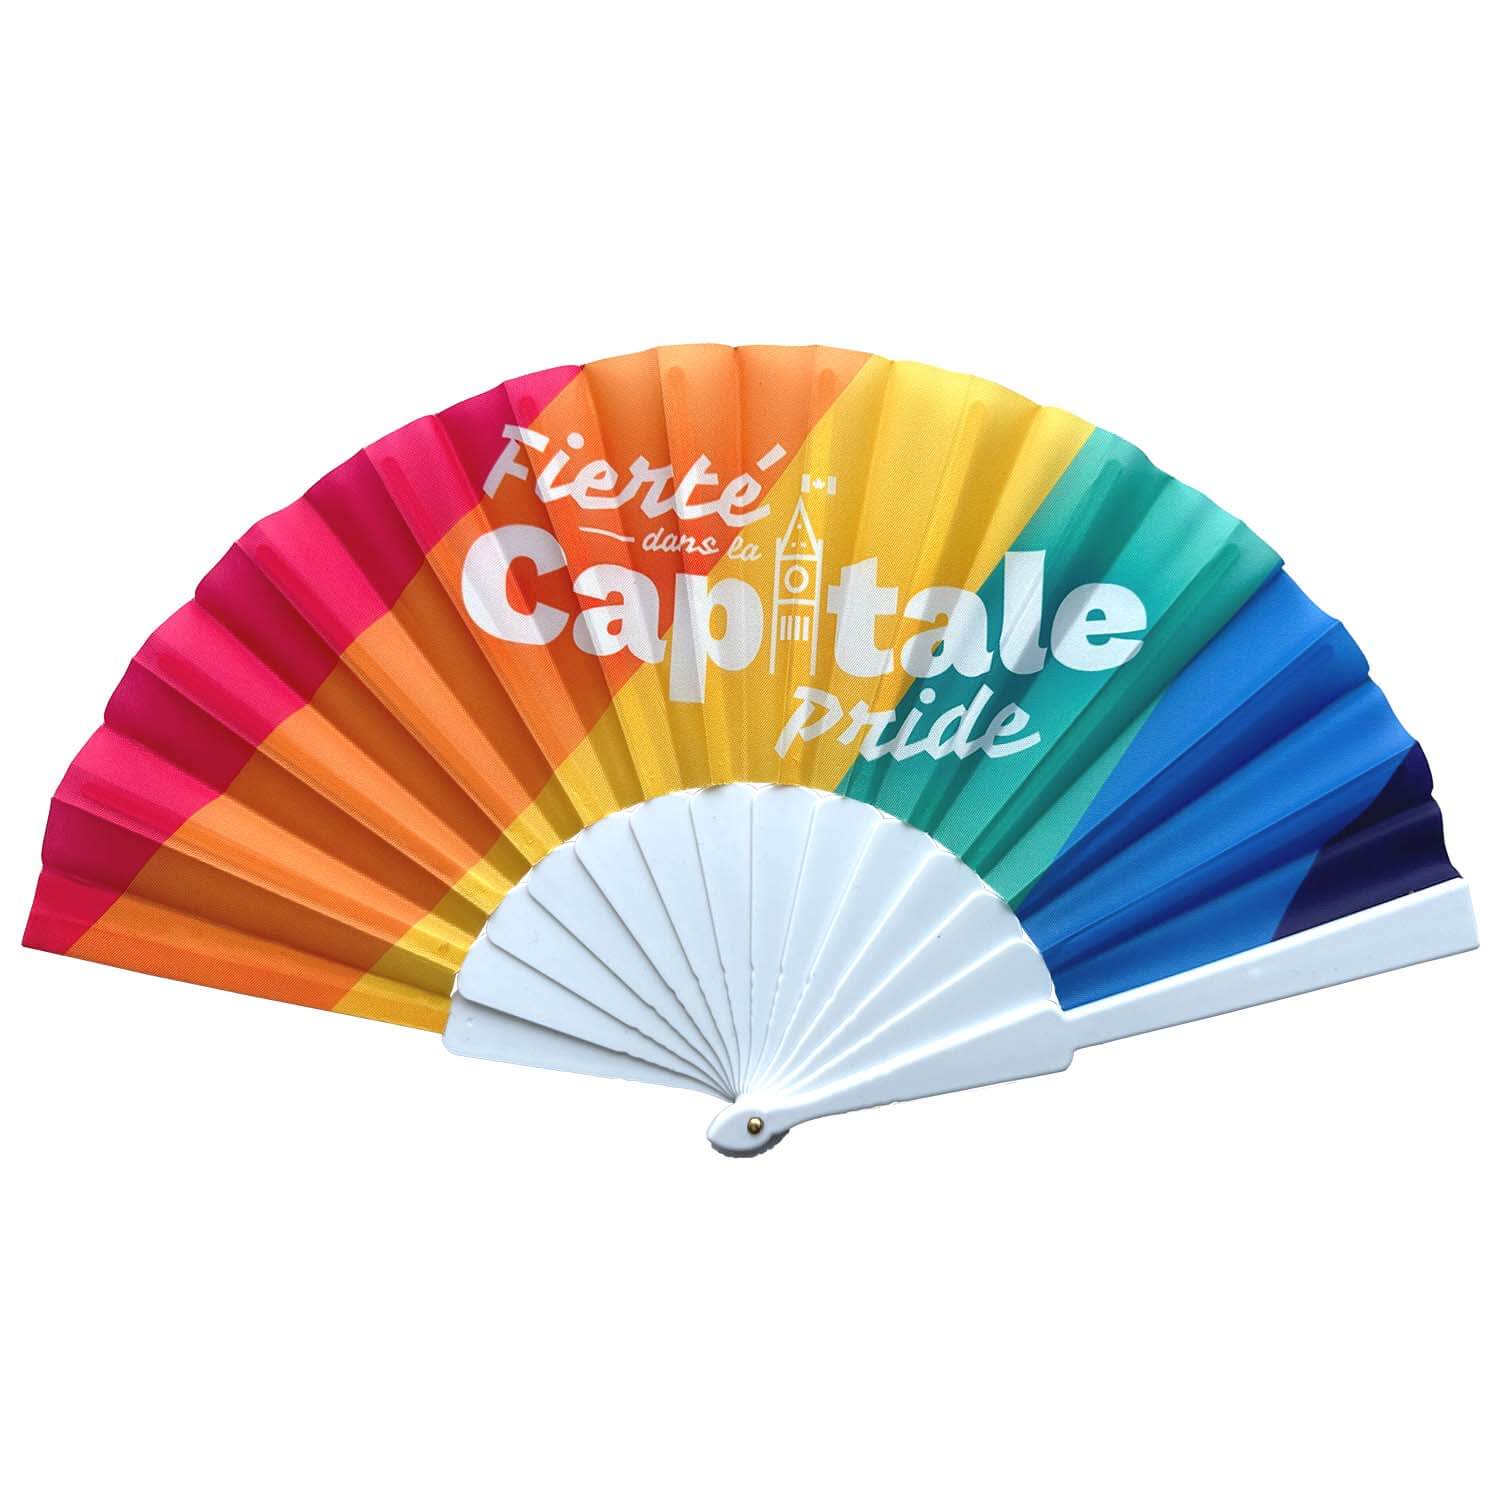 Wholesale Custom Fans from $1.99